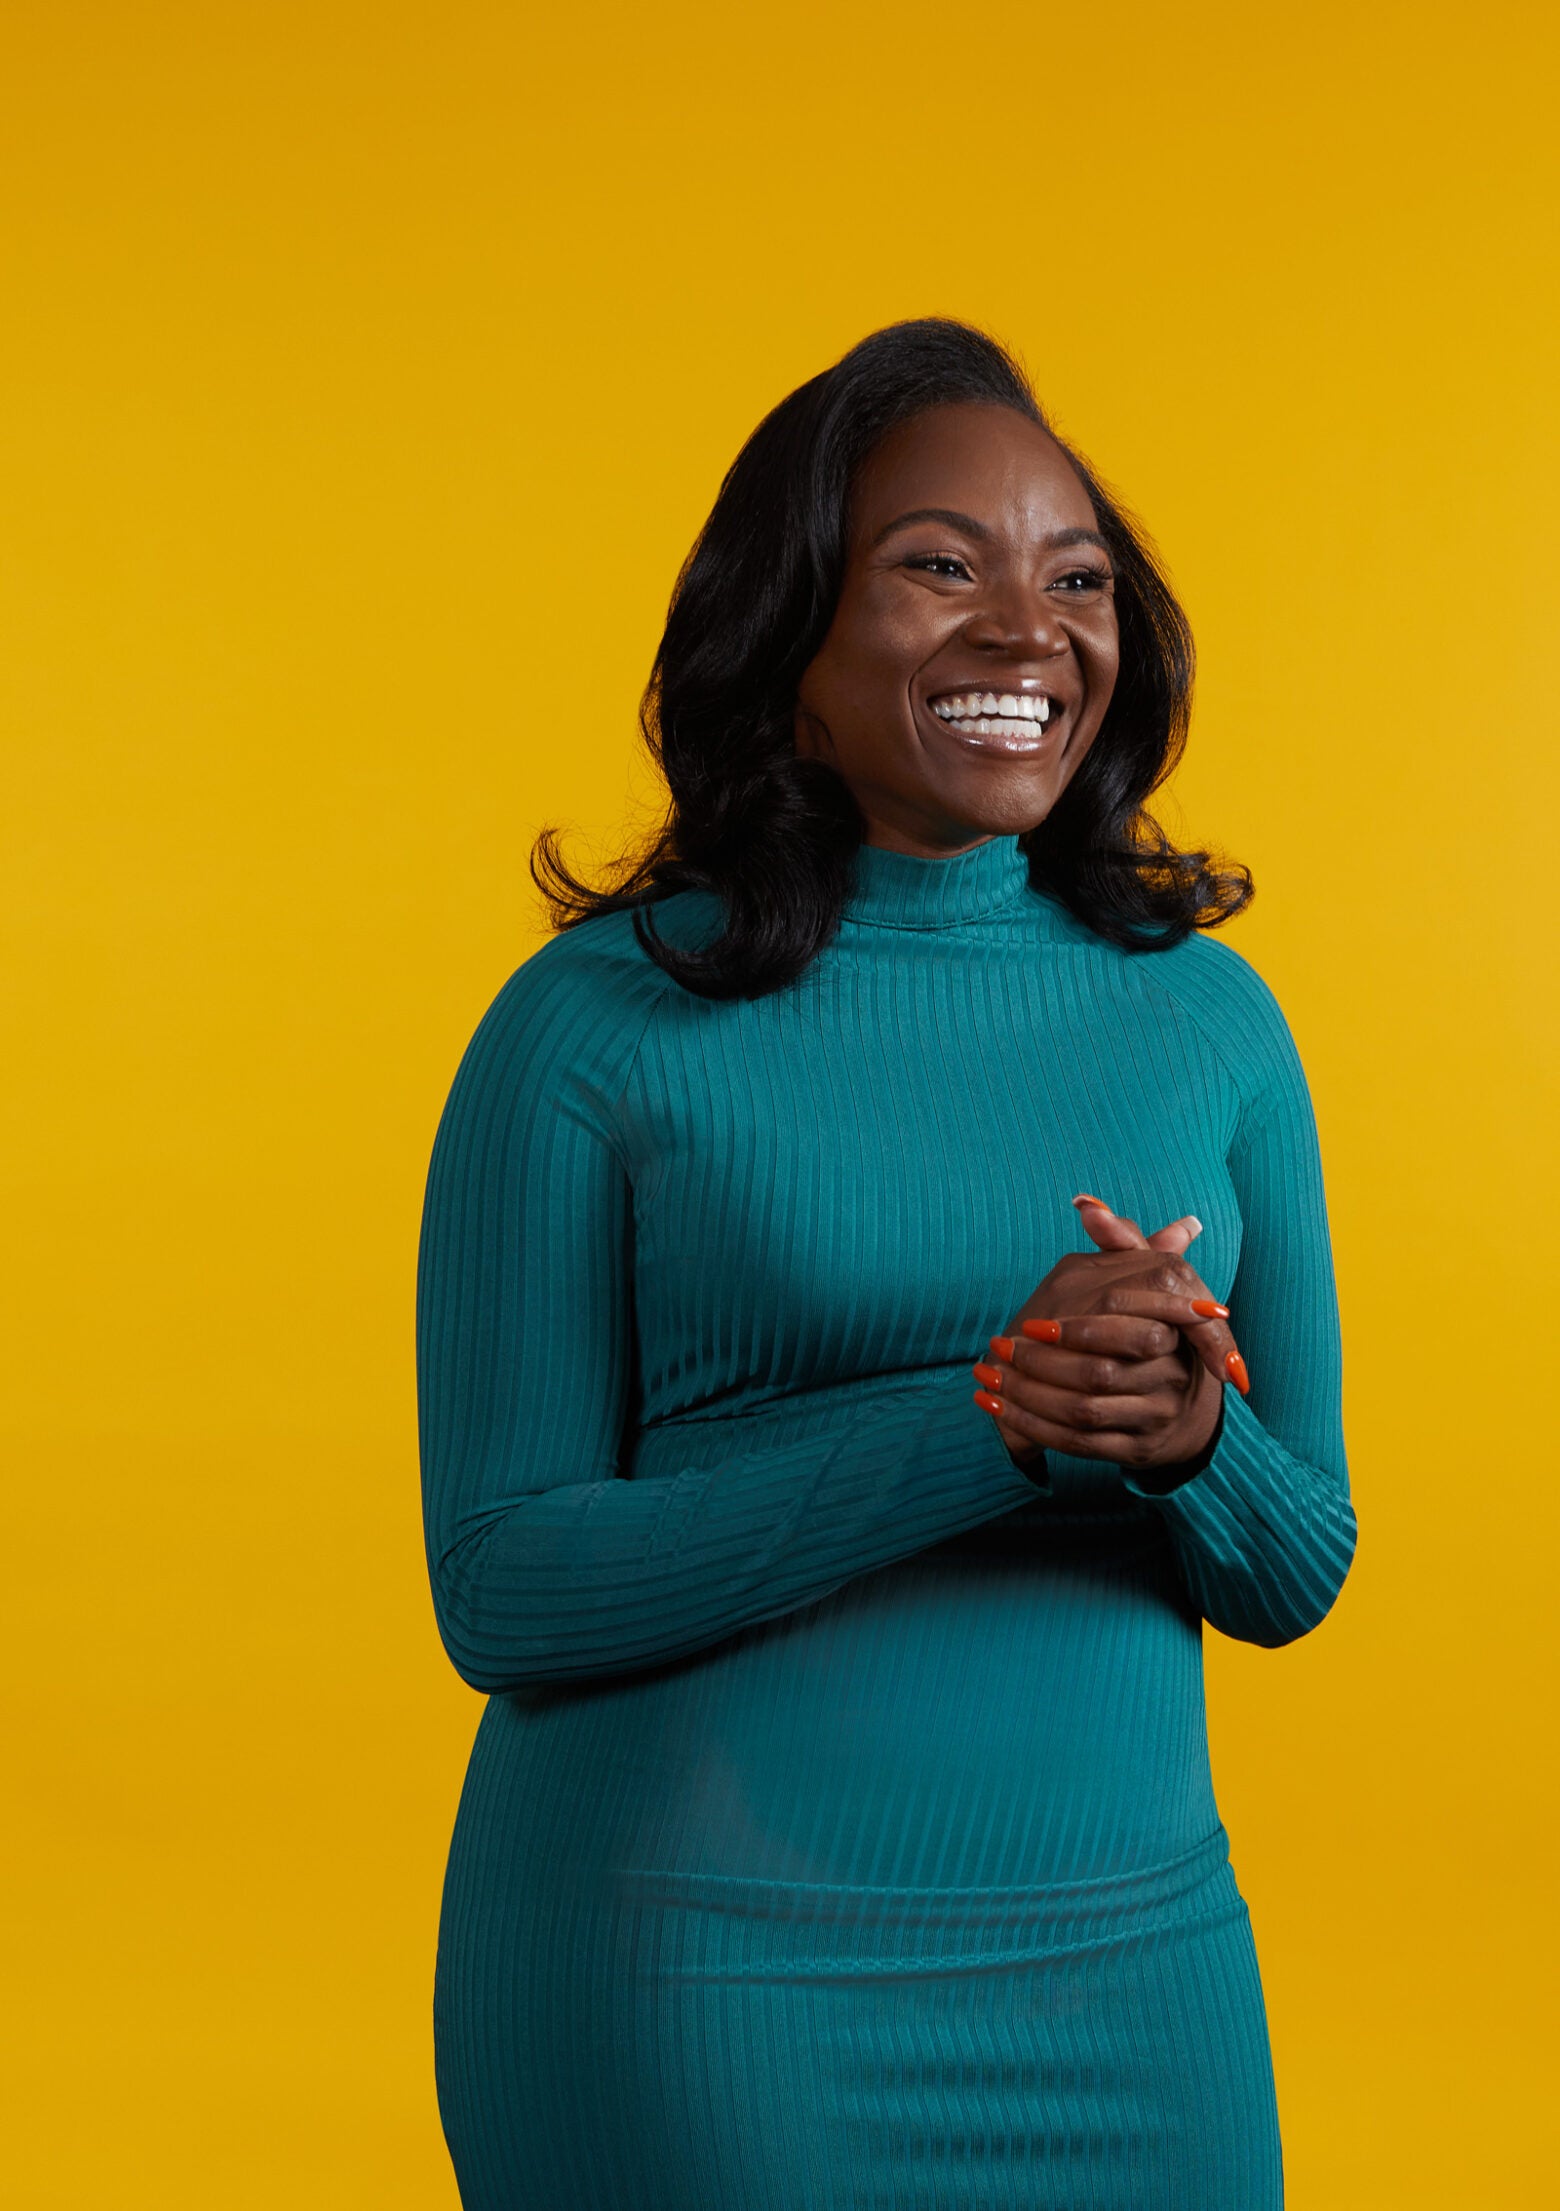 Kizzmekia Corbett wearing a longsleeve, teal turtleneck dress, smiles and looks off camera with her hands clasped.